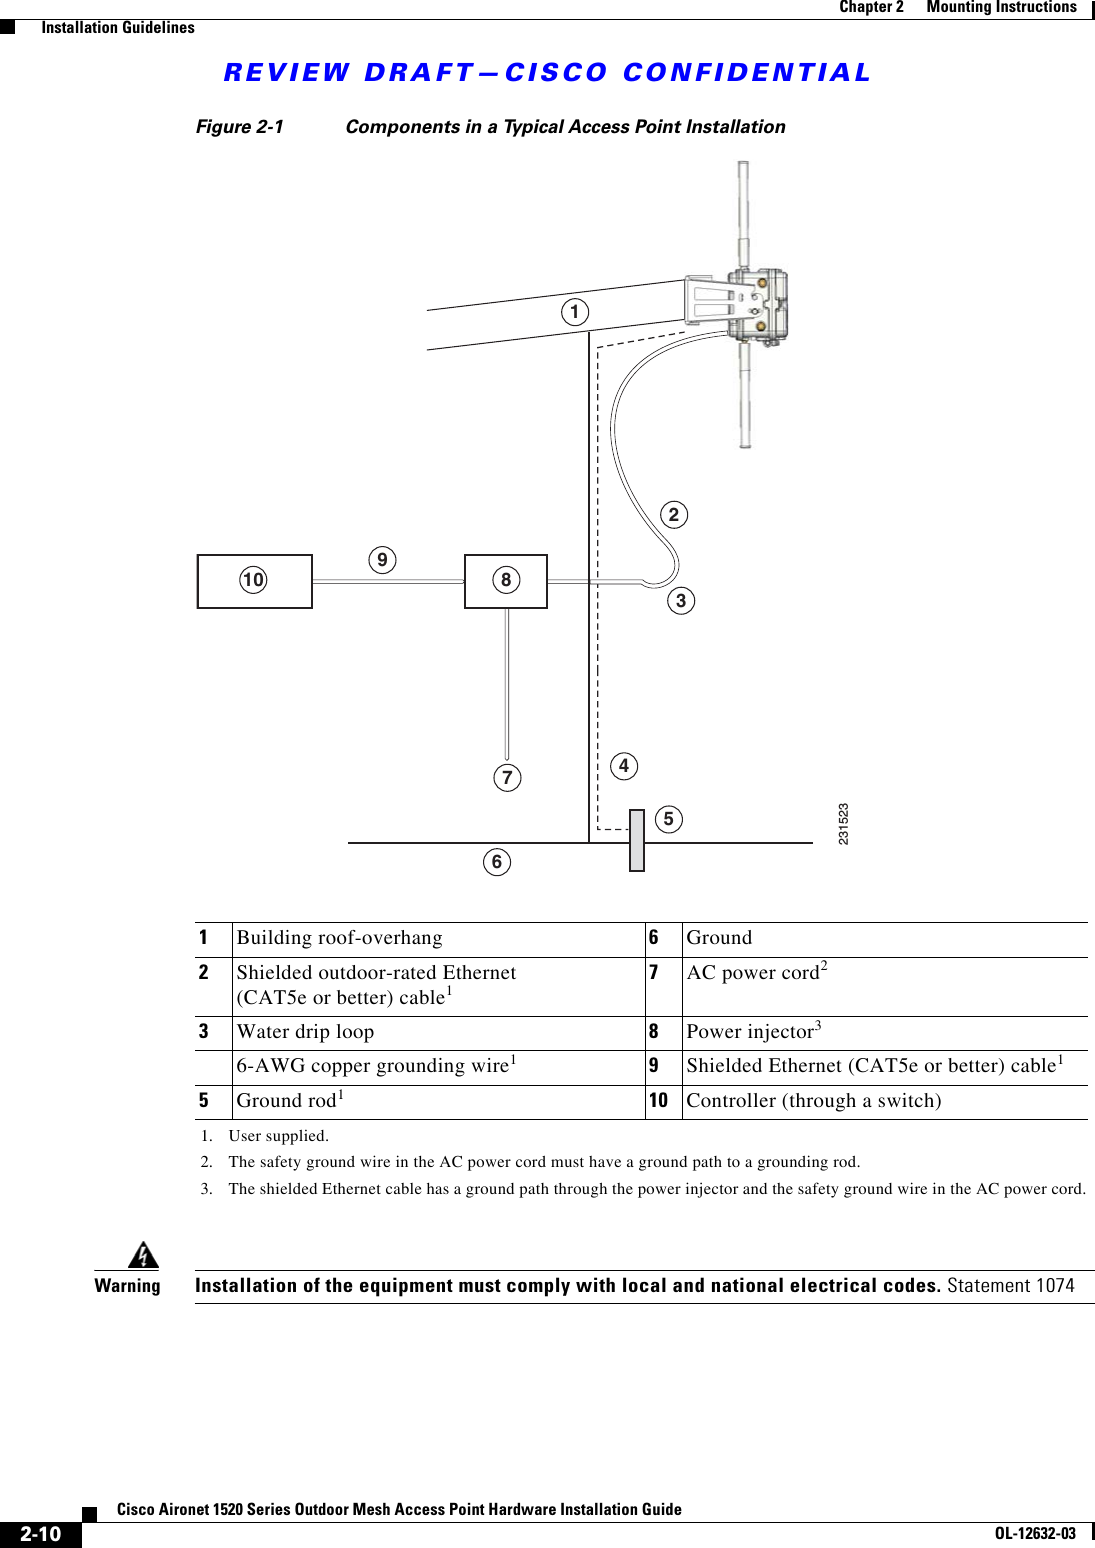 REVIEW DRAFT—CISCO CONFIDENTIAL2-10Cisco Aironet 1520 Series Outdoor Mesh Access Point Hardware Installation GuideOL-12632-03Chapter 2      Mounting Instructions  Installation GuidelinesFigure 2-1 Components in a Typical Access Point InstallationWarningInstallation of the equipment must comply with local and national electrical codes. Statement 10741Building roof-overhang 6Ground2Shielded outdoor-rated Ethernet (CAT5e or better) cable11. User supplied.7AC power cord22. The safety ground wire in the AC power cord must have a ground path to a grounding rod.3Water drip loop 8Power injector33. The shielded Ethernet cable has a ground path through the power injector and the safety ground wire in the AC power cord.6-AWG copper grounding wire1 9Shielded Ethernet (CAT5e or better) cable15Ground rod1 10 Controller (through a switch)231523110 89765432